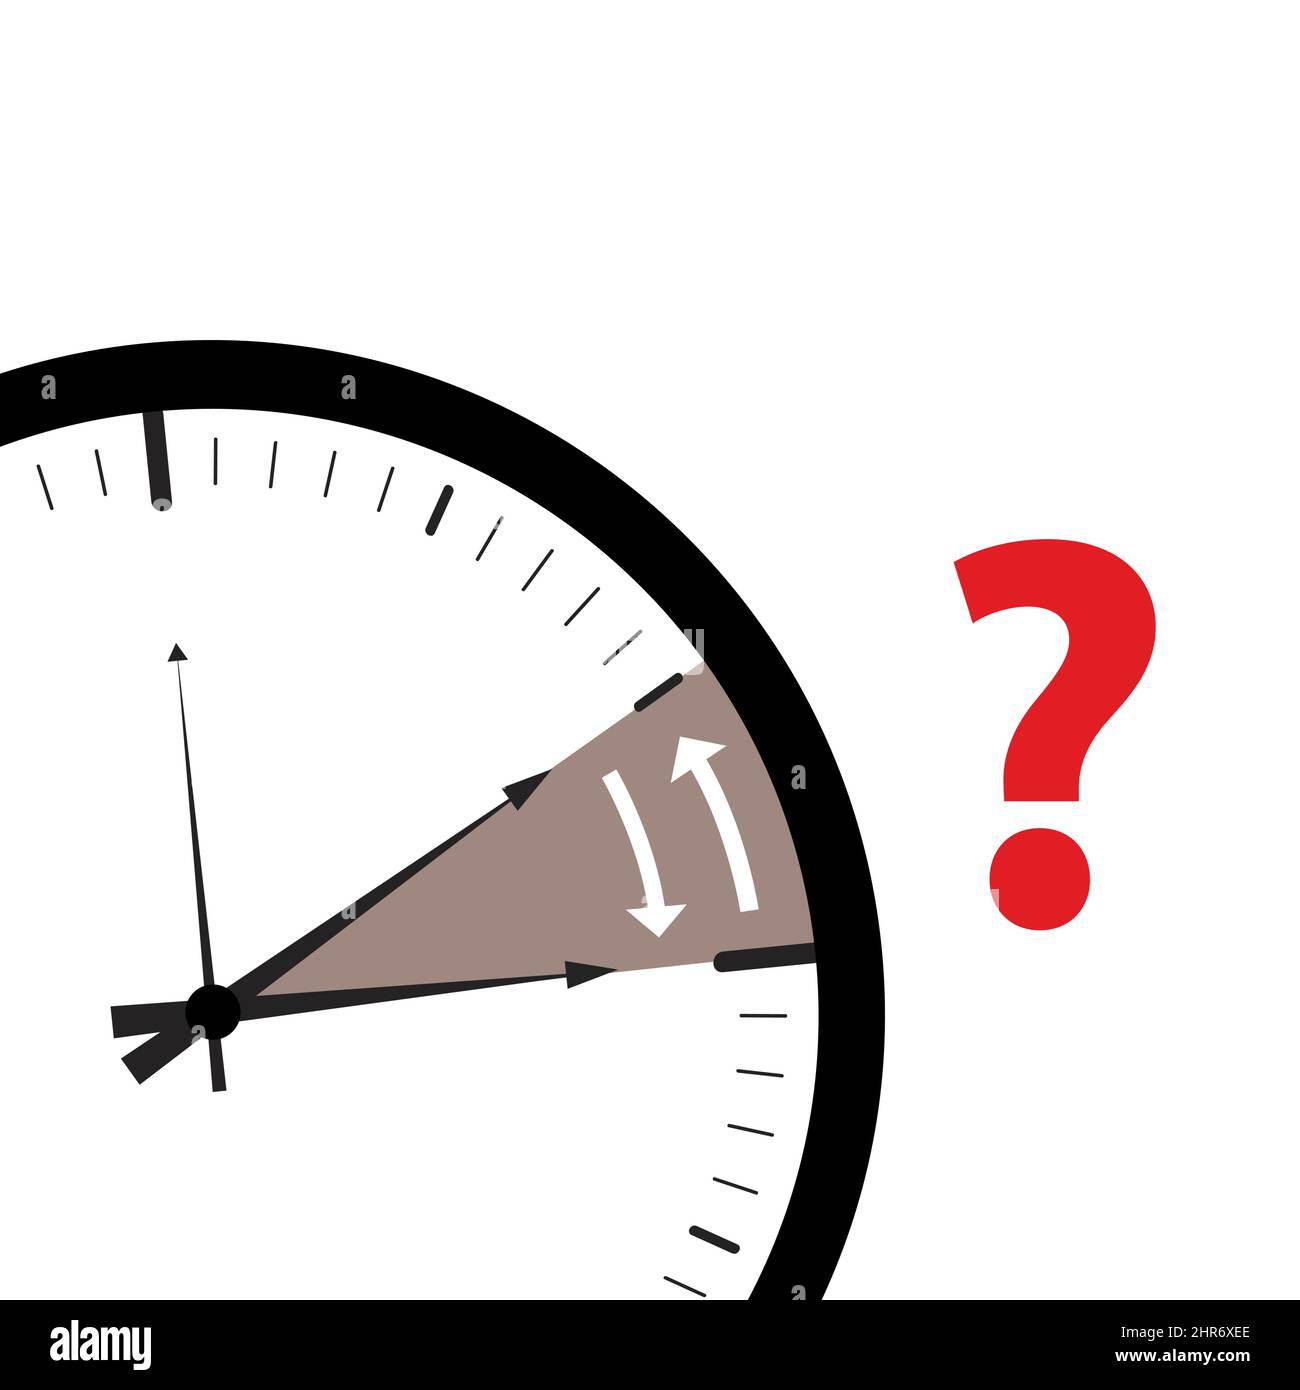 clock time zone change icon image with red question mark Stock Vector